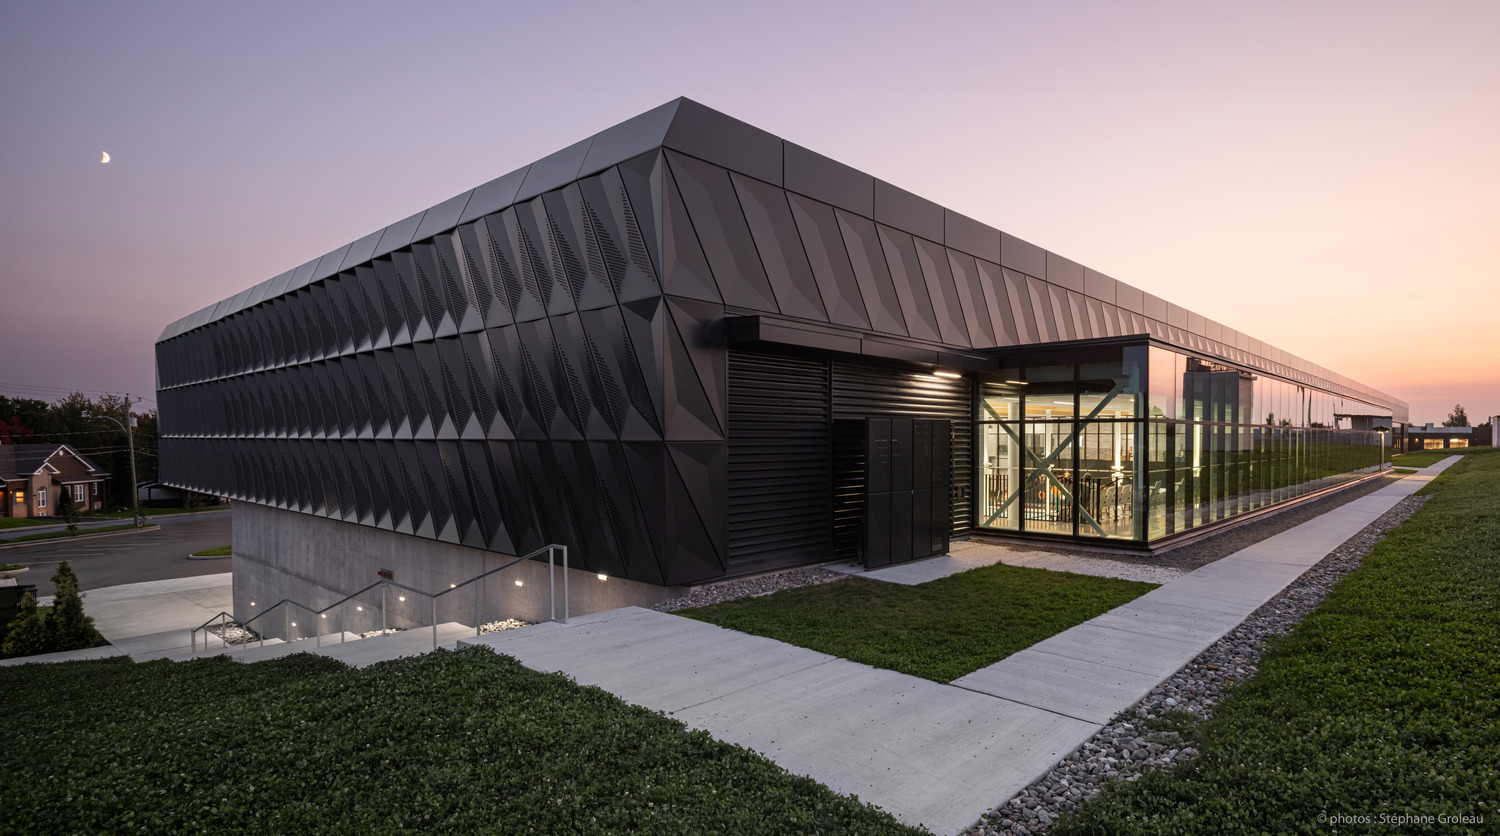 Modern office building at dusk featuring a sleek, angular design with expansive glass windows and subtle outdoor lighting, under a twilight sky with a visible crescent moon.